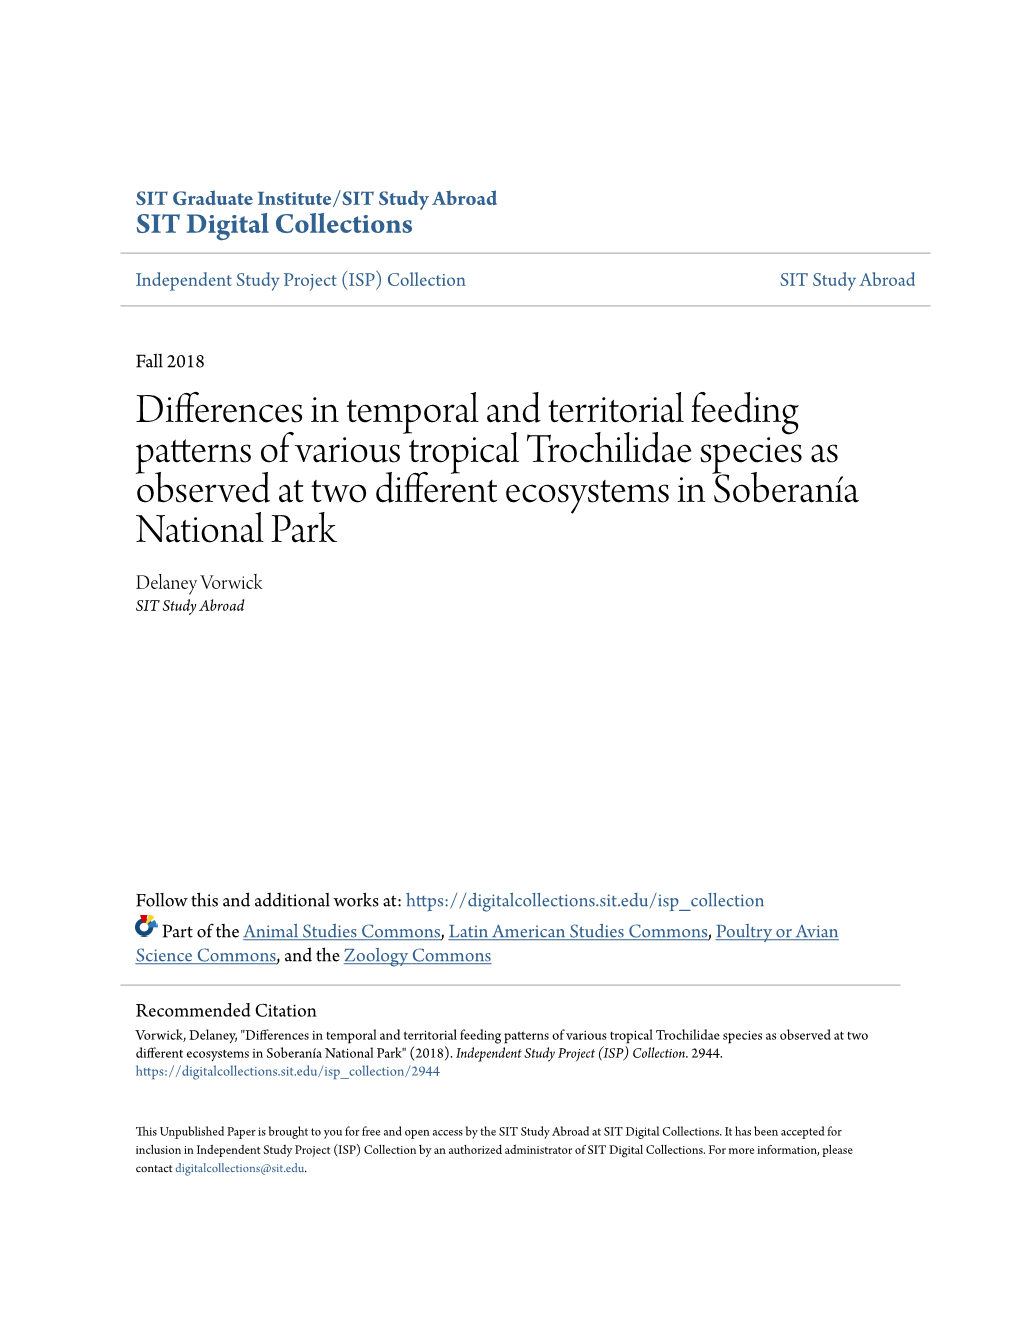 Differences in Temporal and Territorial Feeding Patterns of Various Tropical